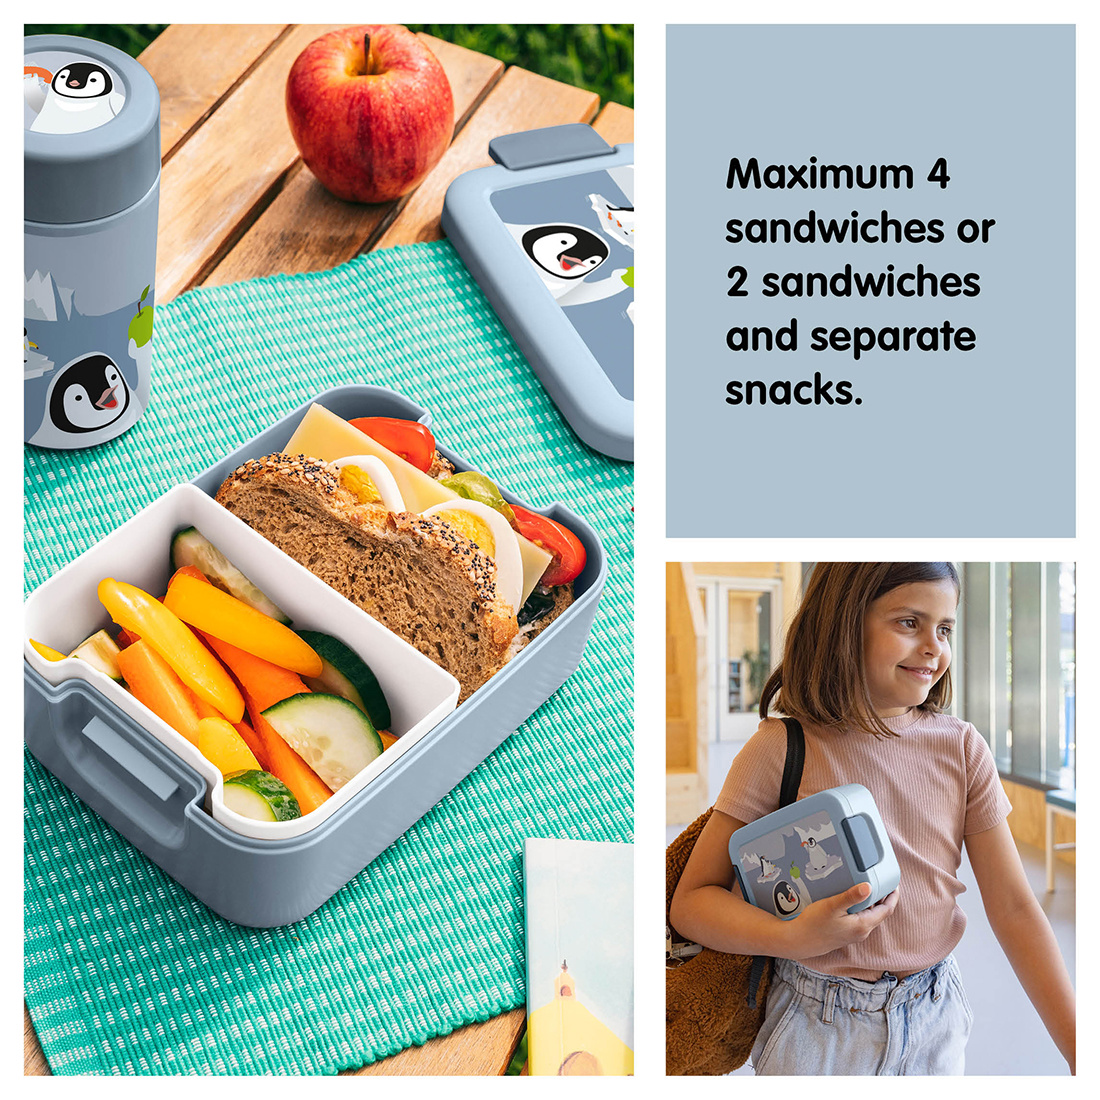 Sigma home Food to go lunchset pinguïn 